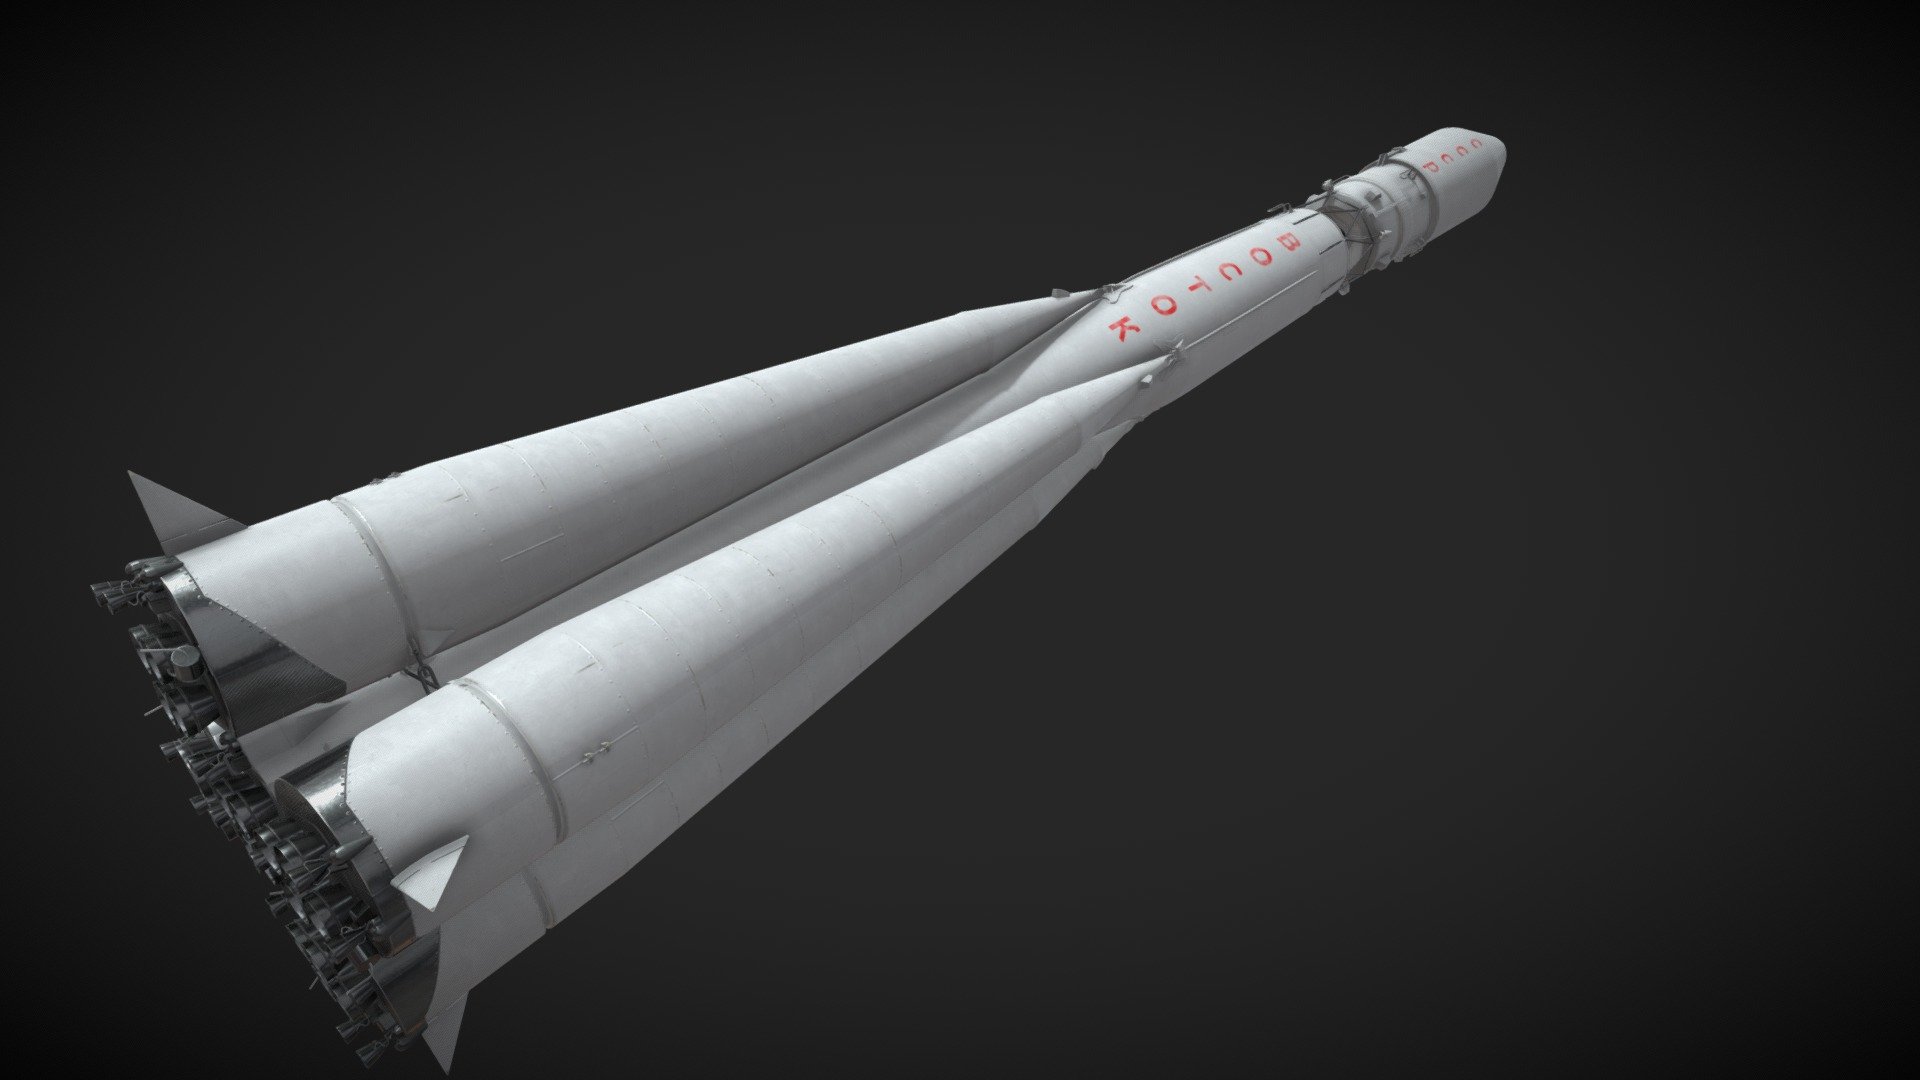 3d model Vostok 1.

The Vostok-1 rocket was used for the flight of the first man into space on May 12, 1961 3d model